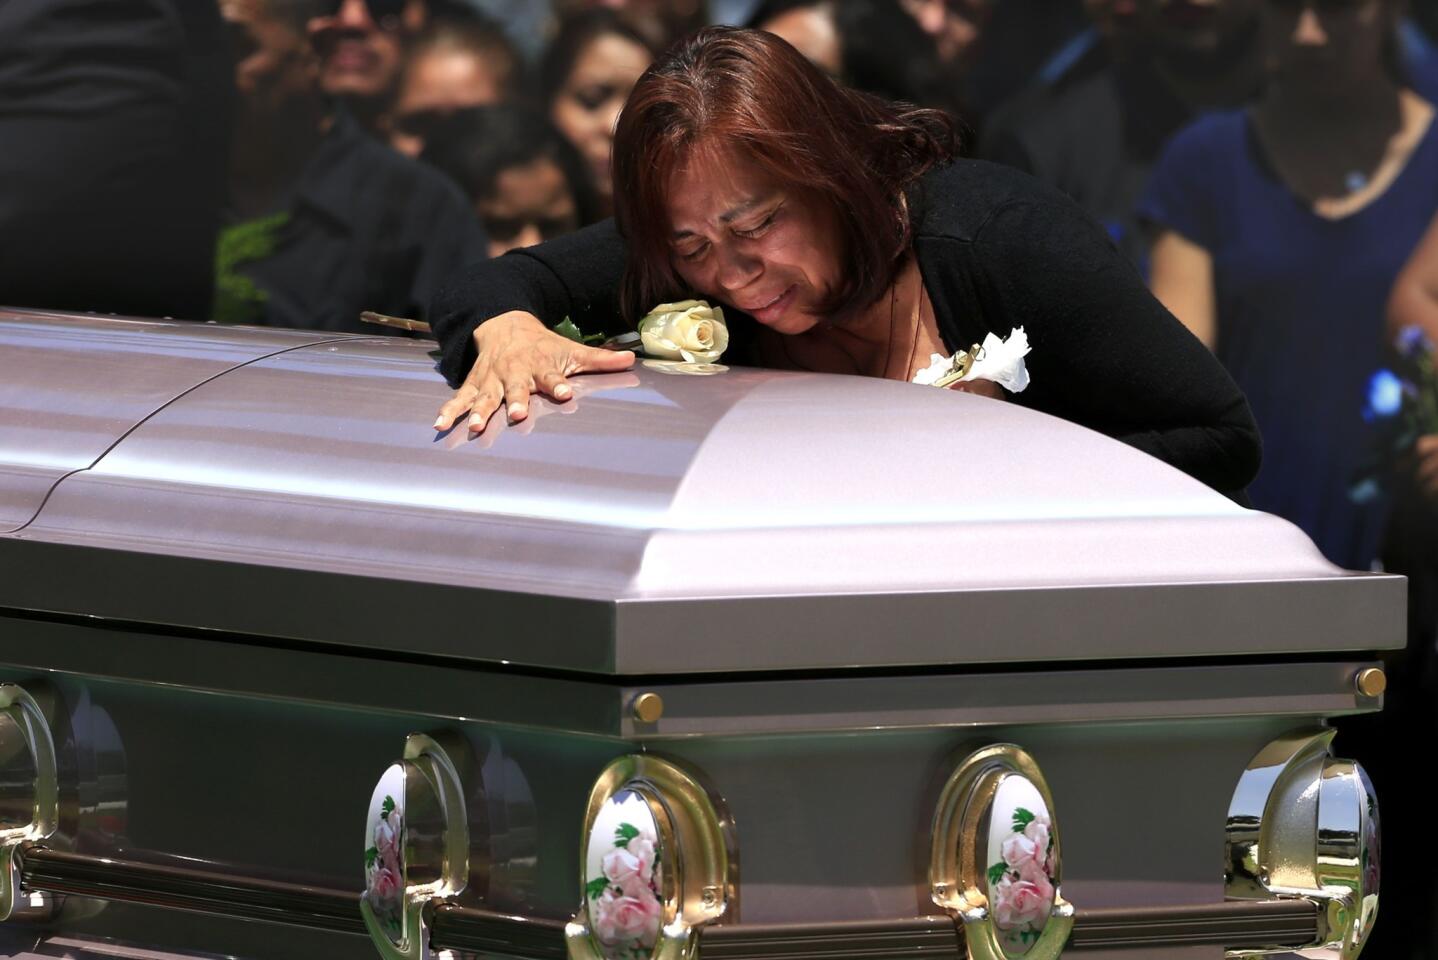 Macrina Reyes cries while she places a flower on the coffin of her transgender daughter, Zoraida Reyes, 28, during graveside services at Santa Ana Cemetery on June 23.